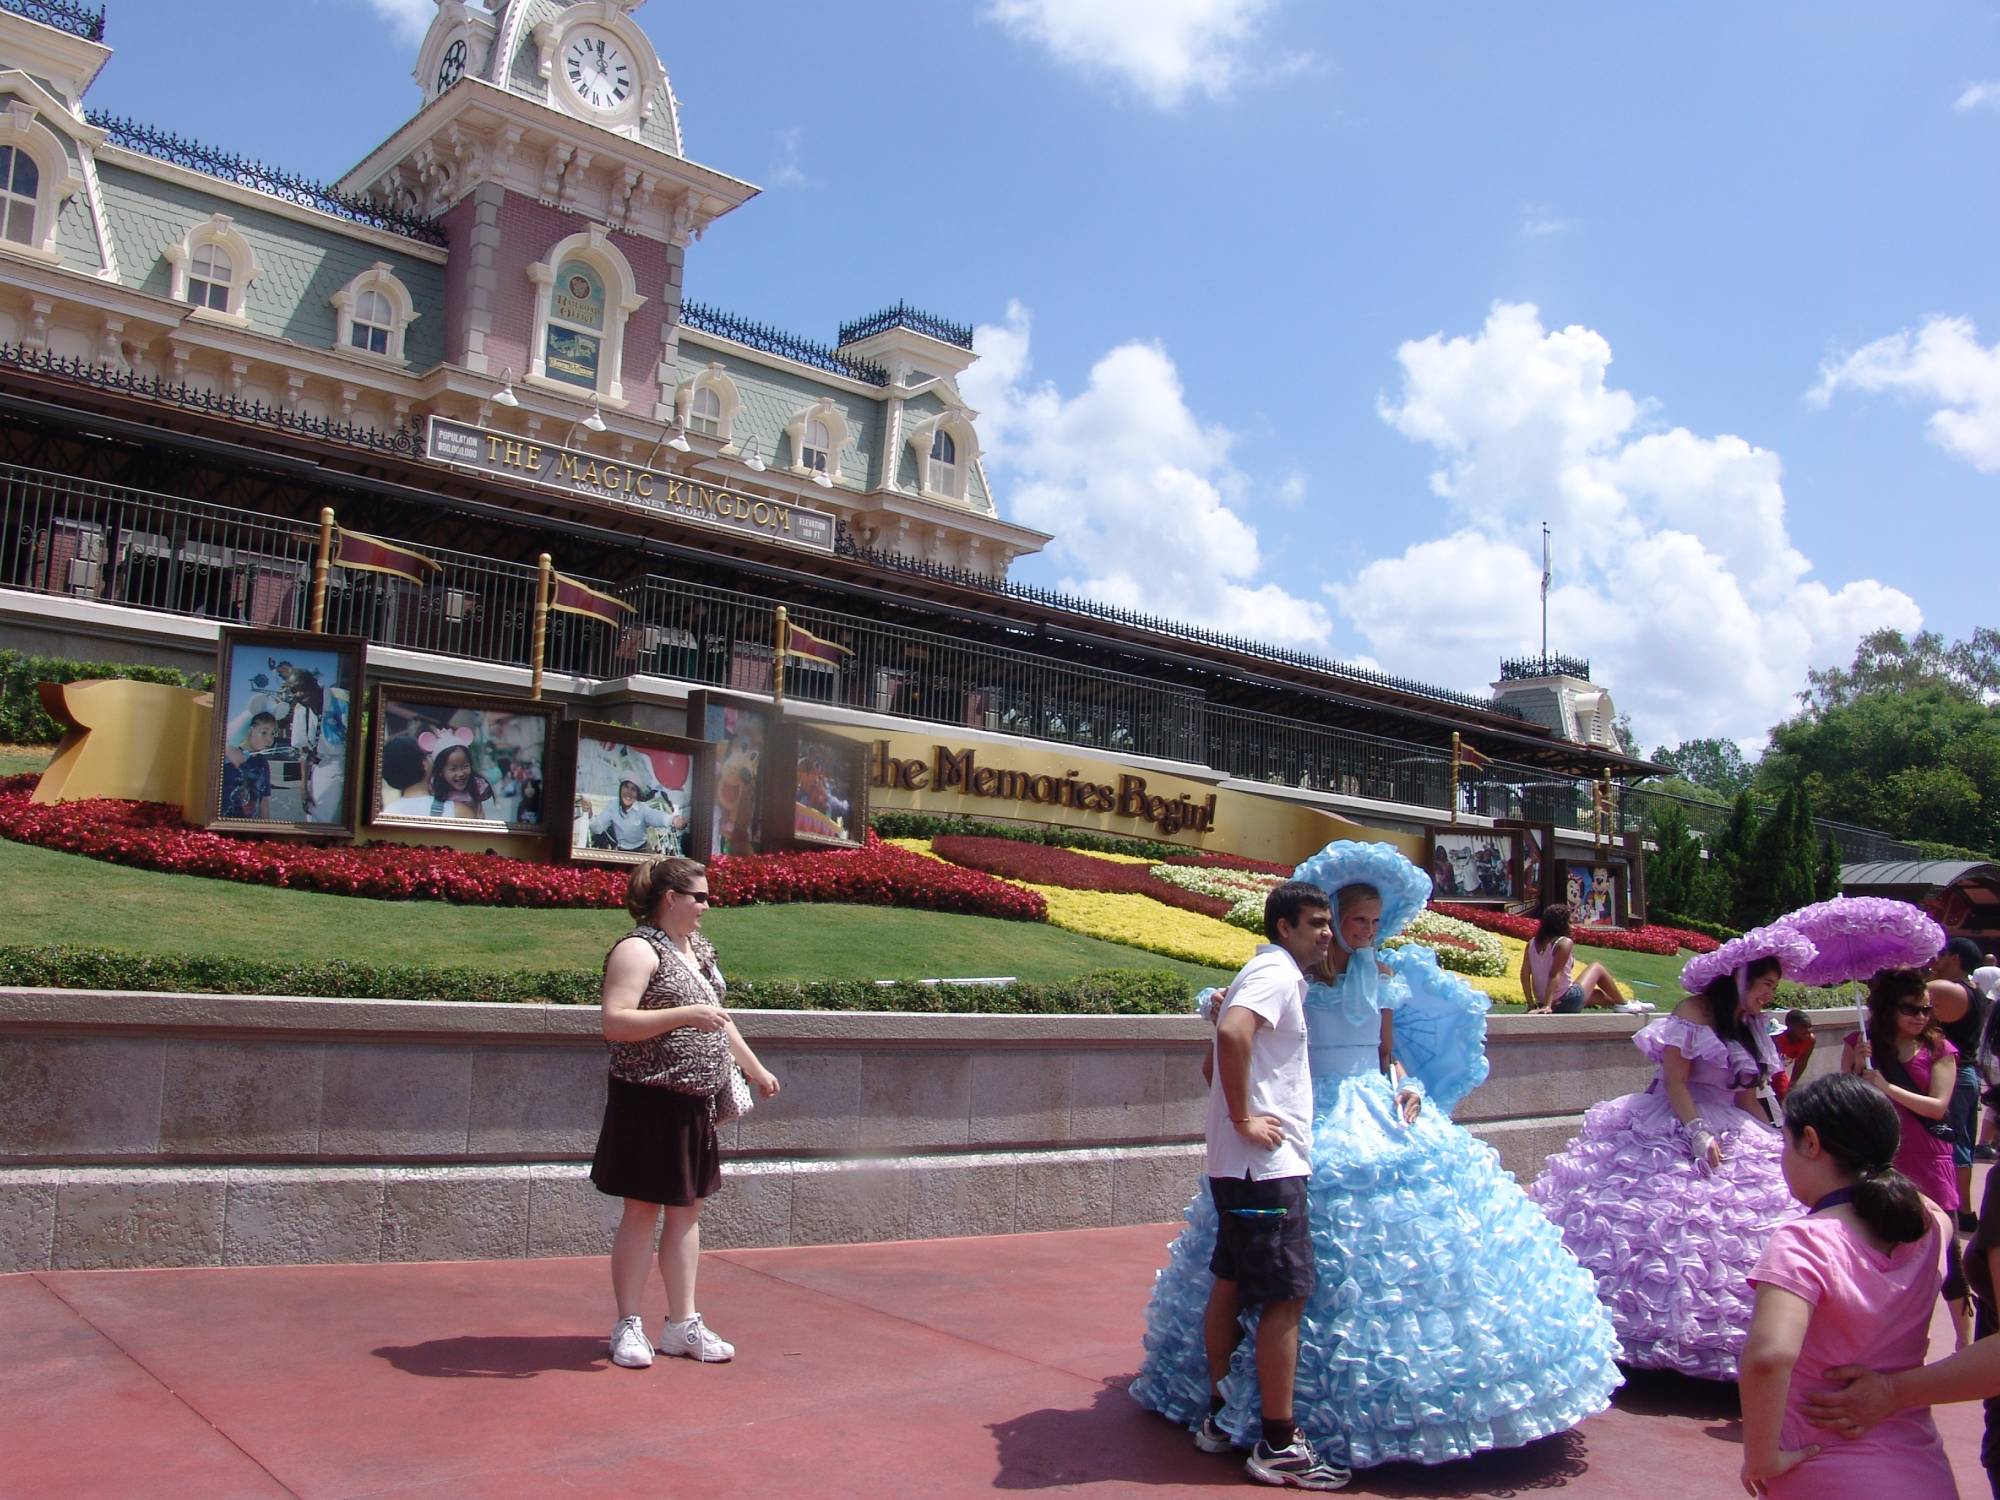 Magic Kingdom - Easter surprise for the crowds